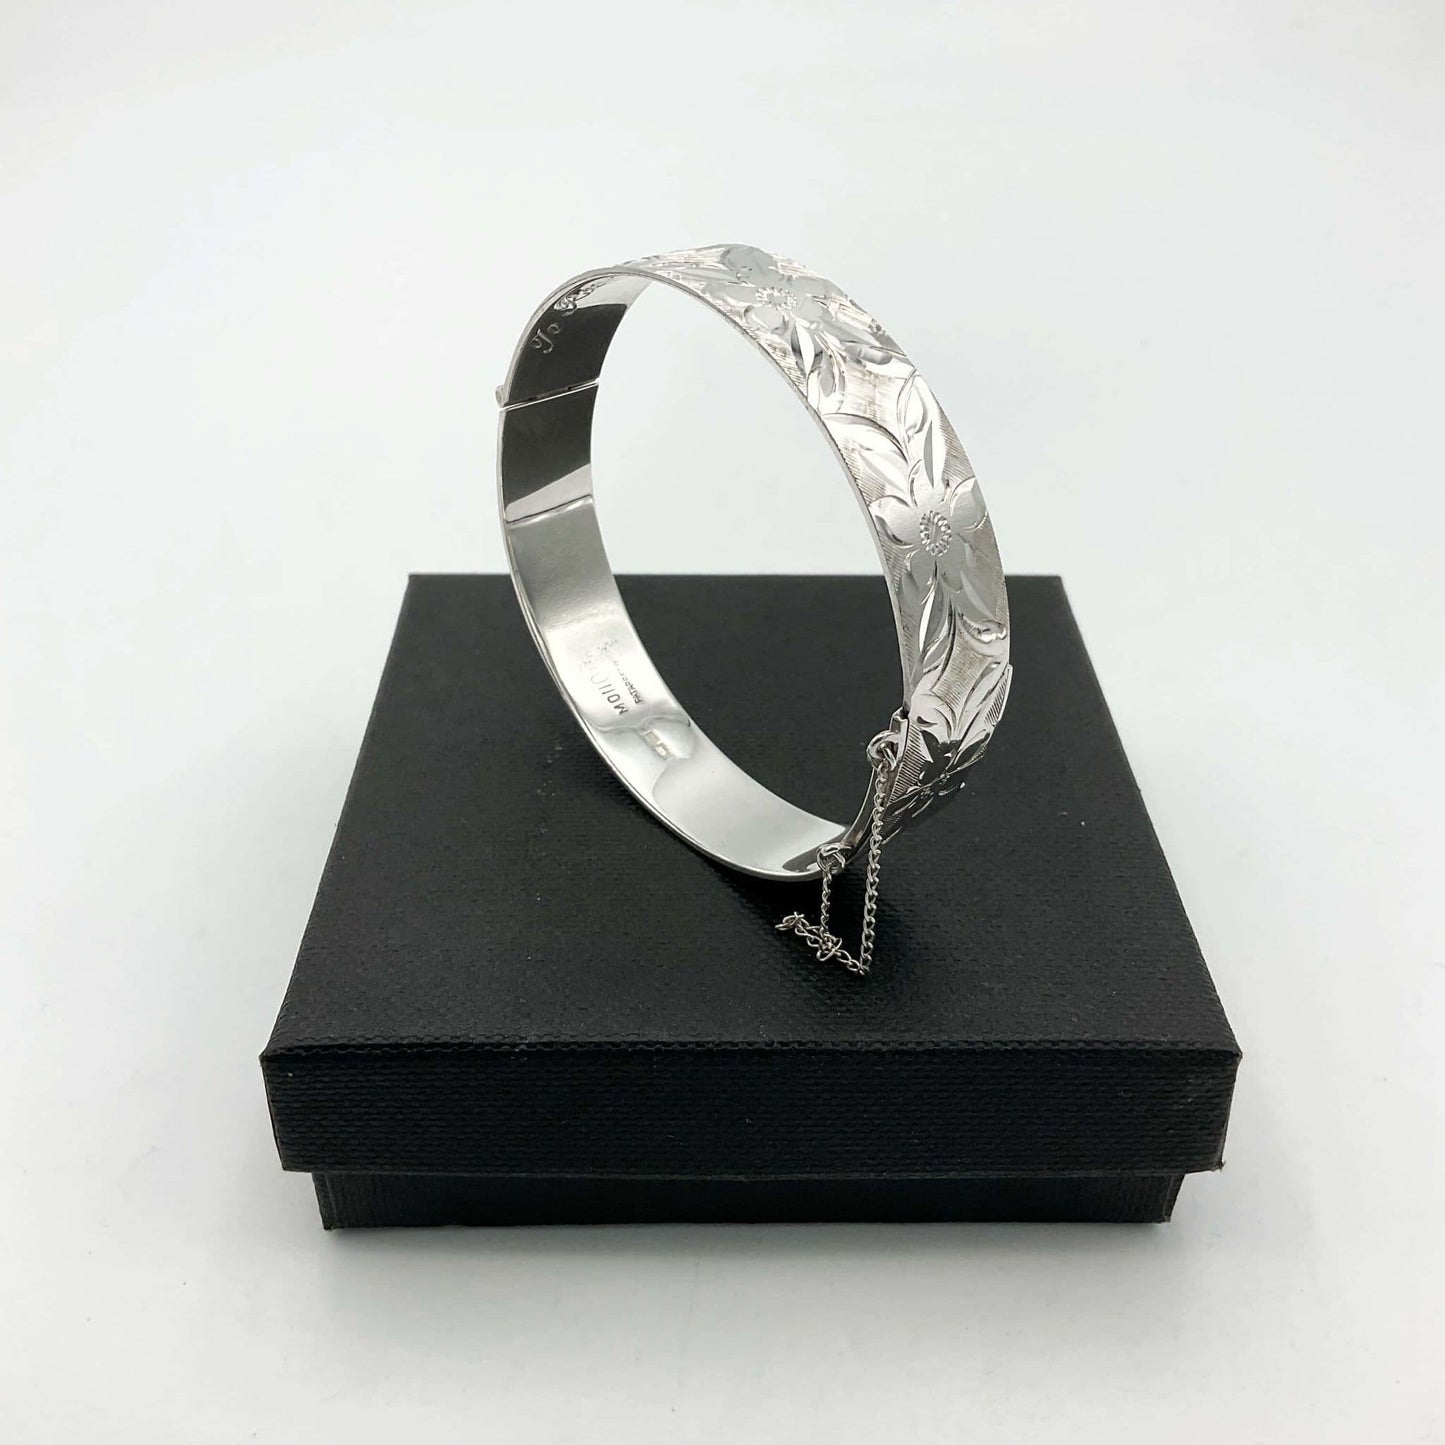 Silver bracelt with engraved flowers sitting on a black box